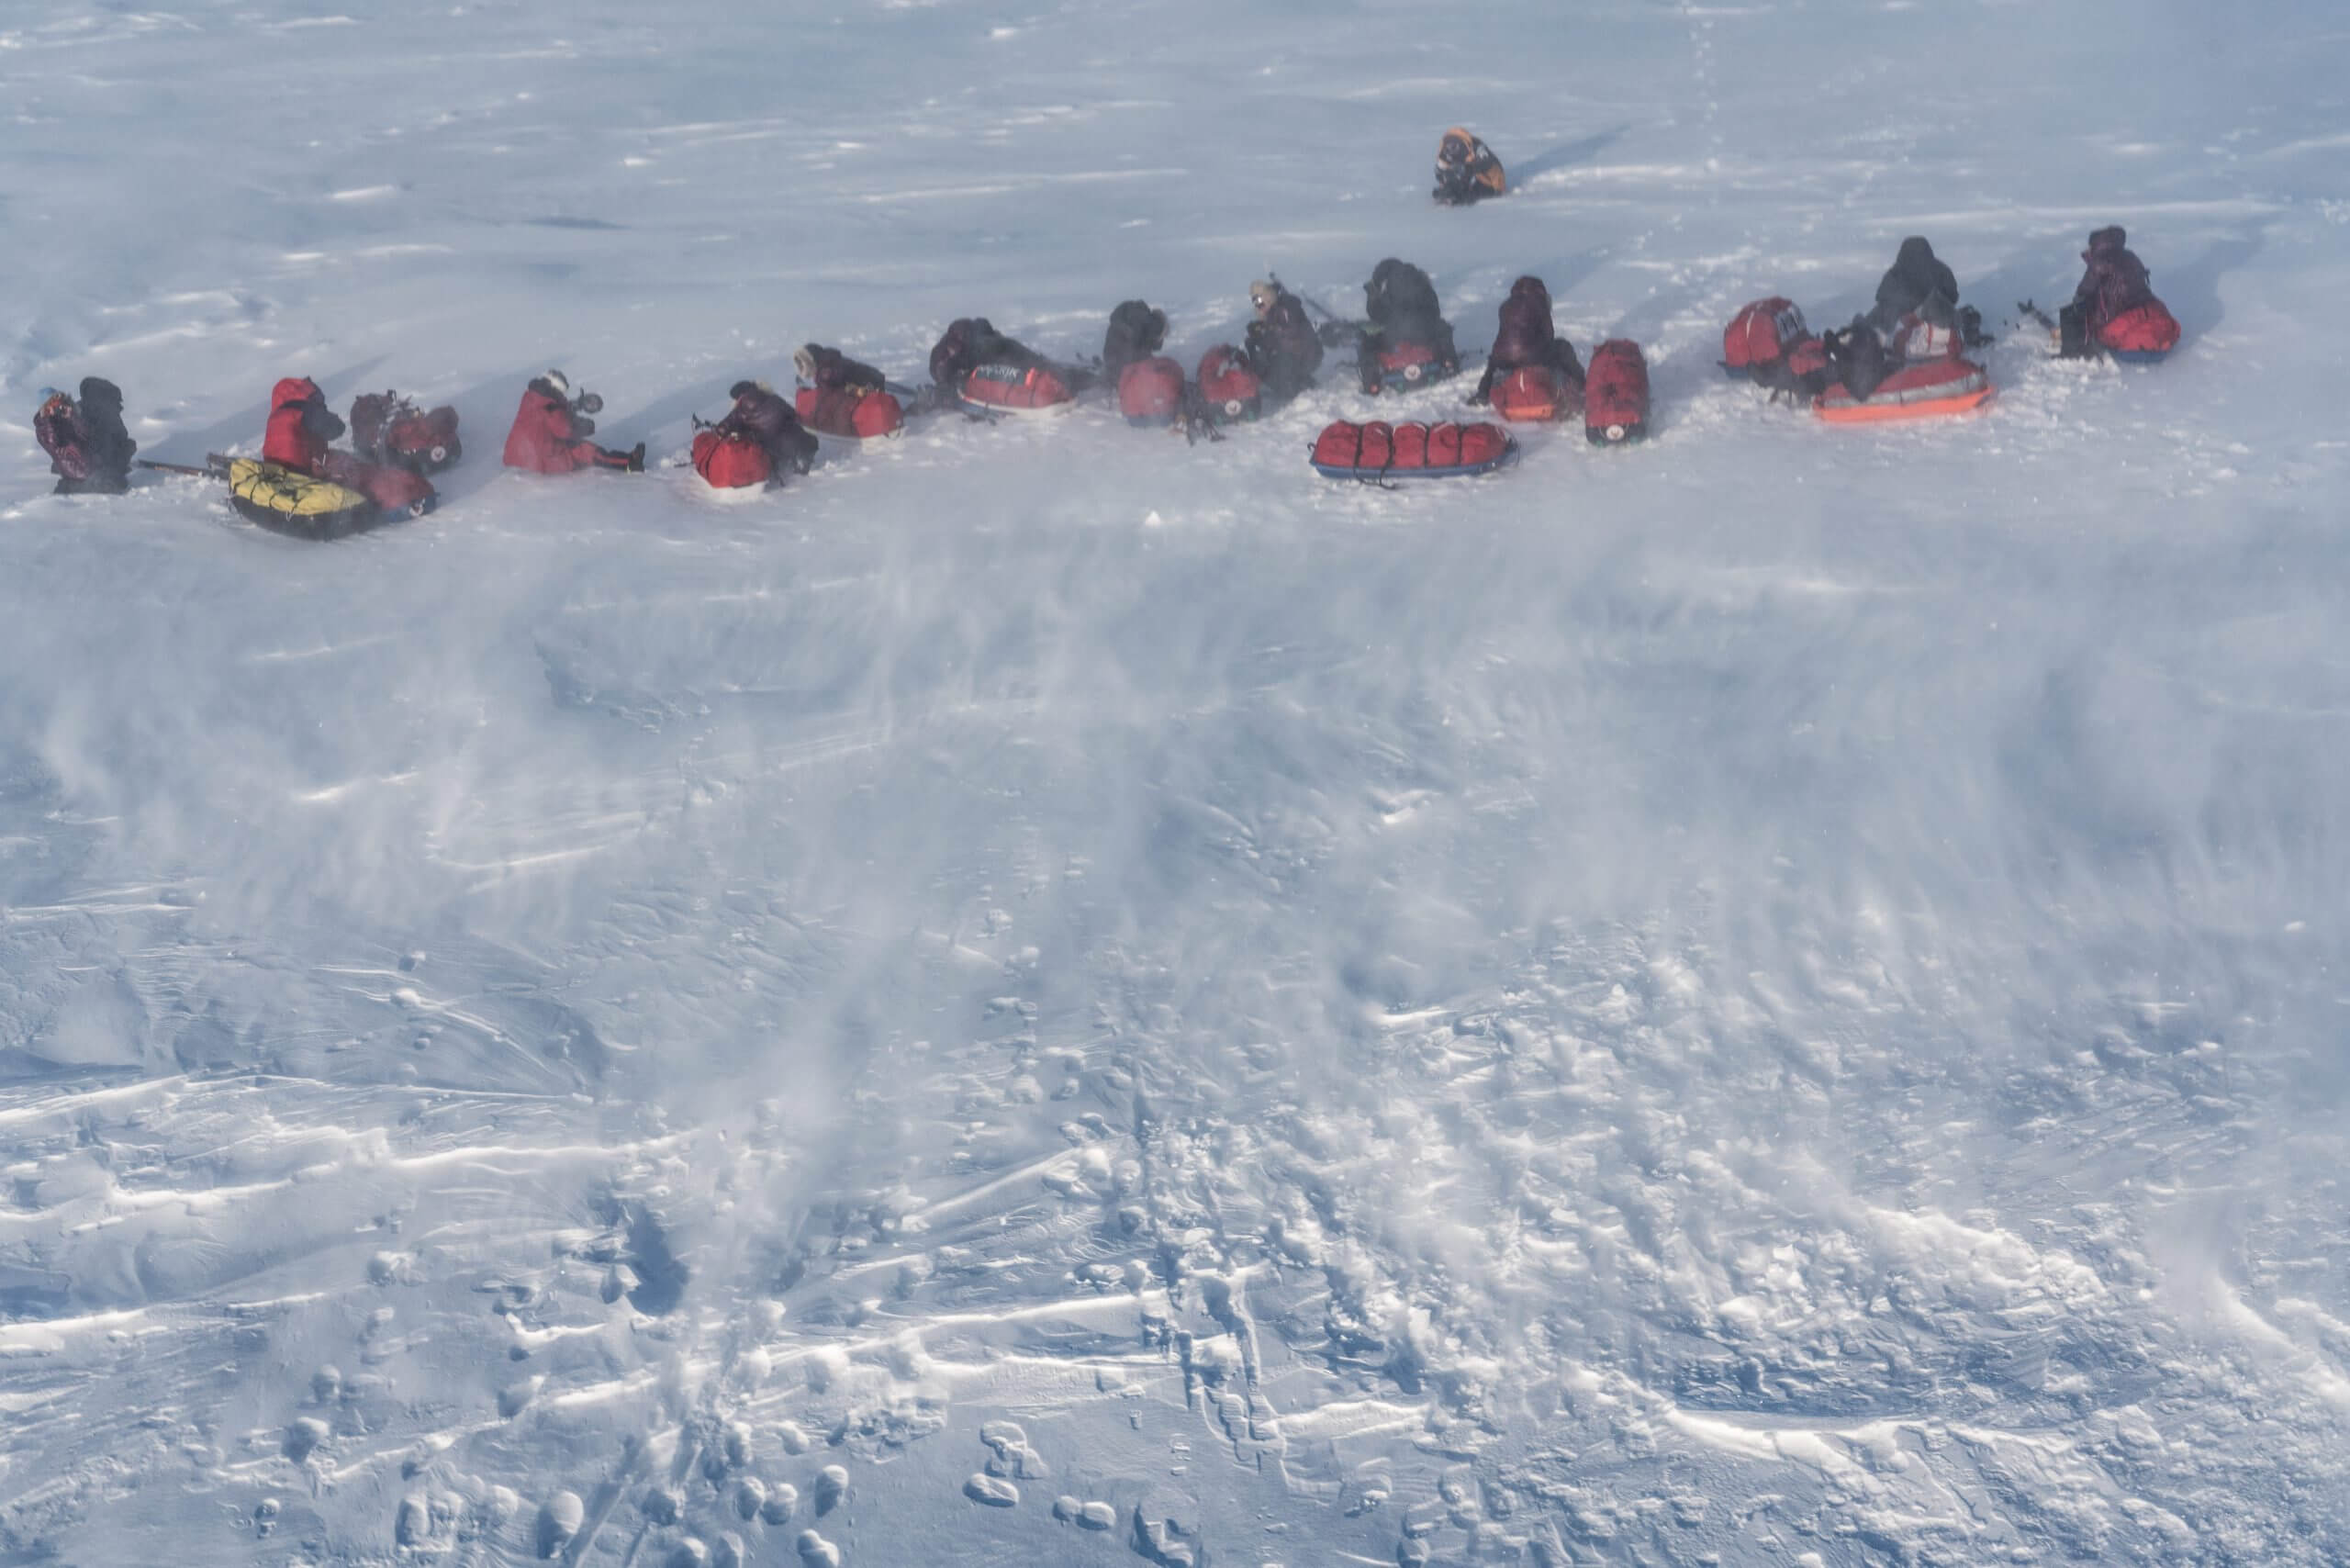 Bird's eye view of approximately 20 people in winter gear sitting and laying in a horizontal line across the snow.